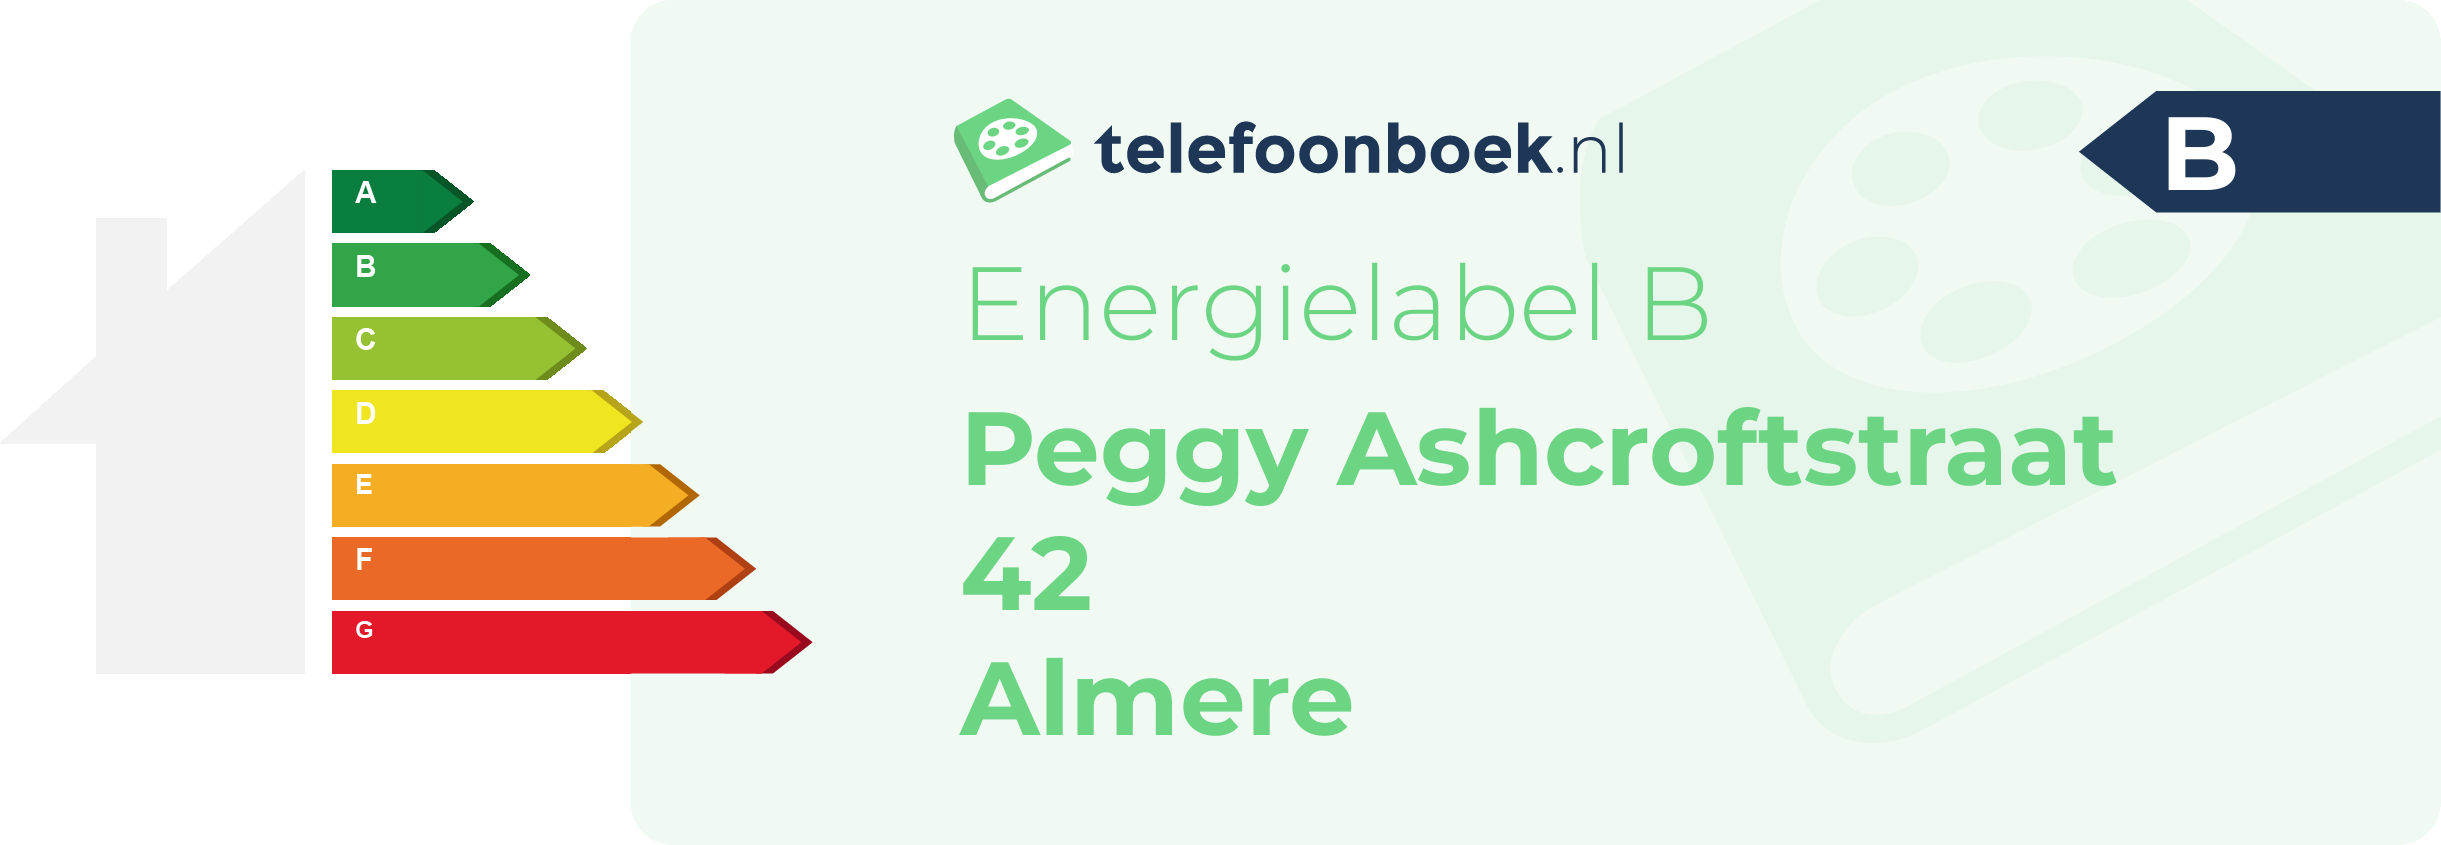 Energielabel Peggy Ashcroftstraat 42 Almere